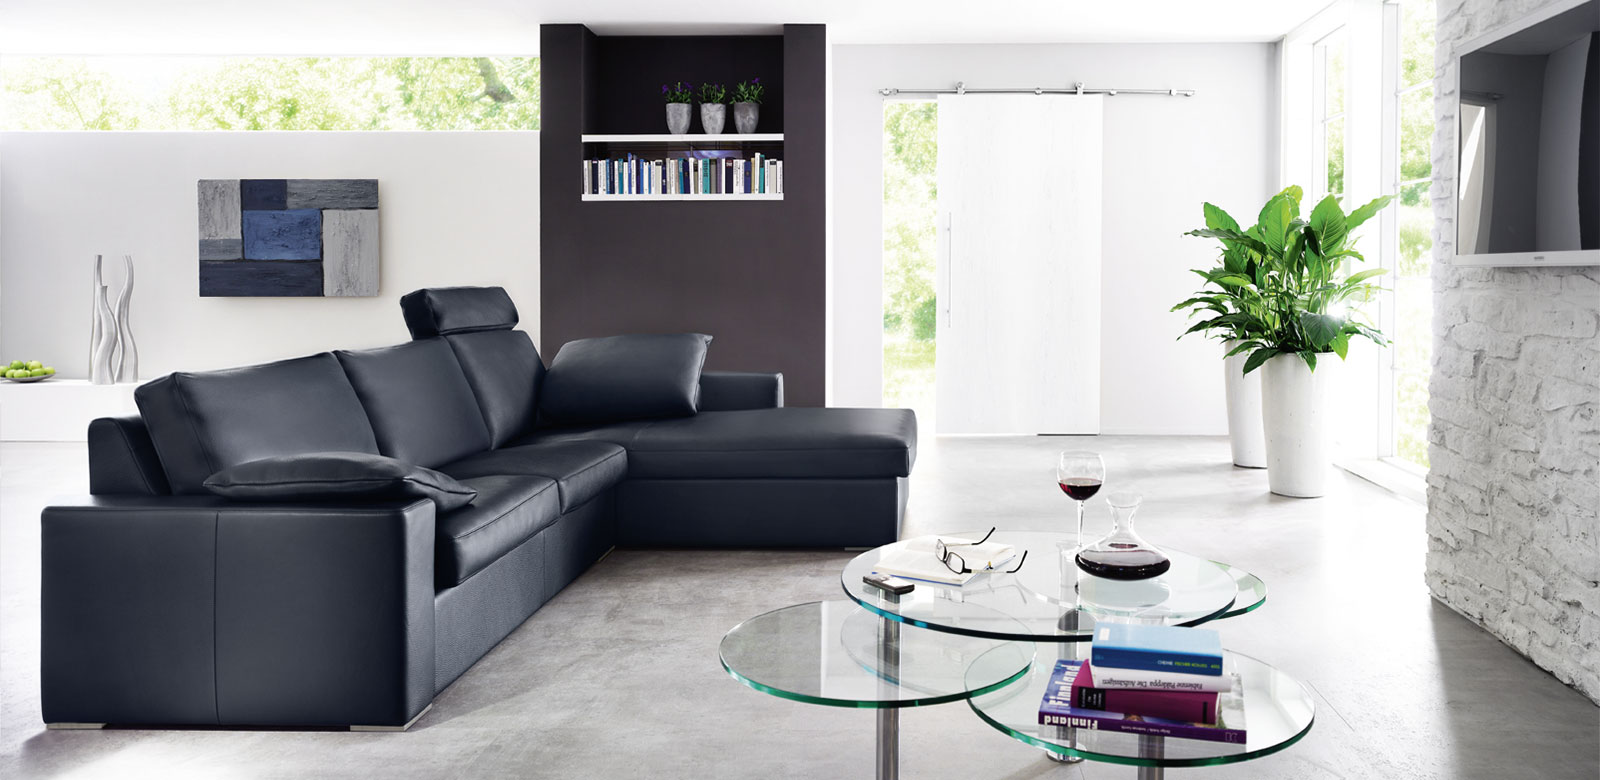 Side view CL150 in black leather as longchair combination with cushions and headrests in modern living room with glass tables.